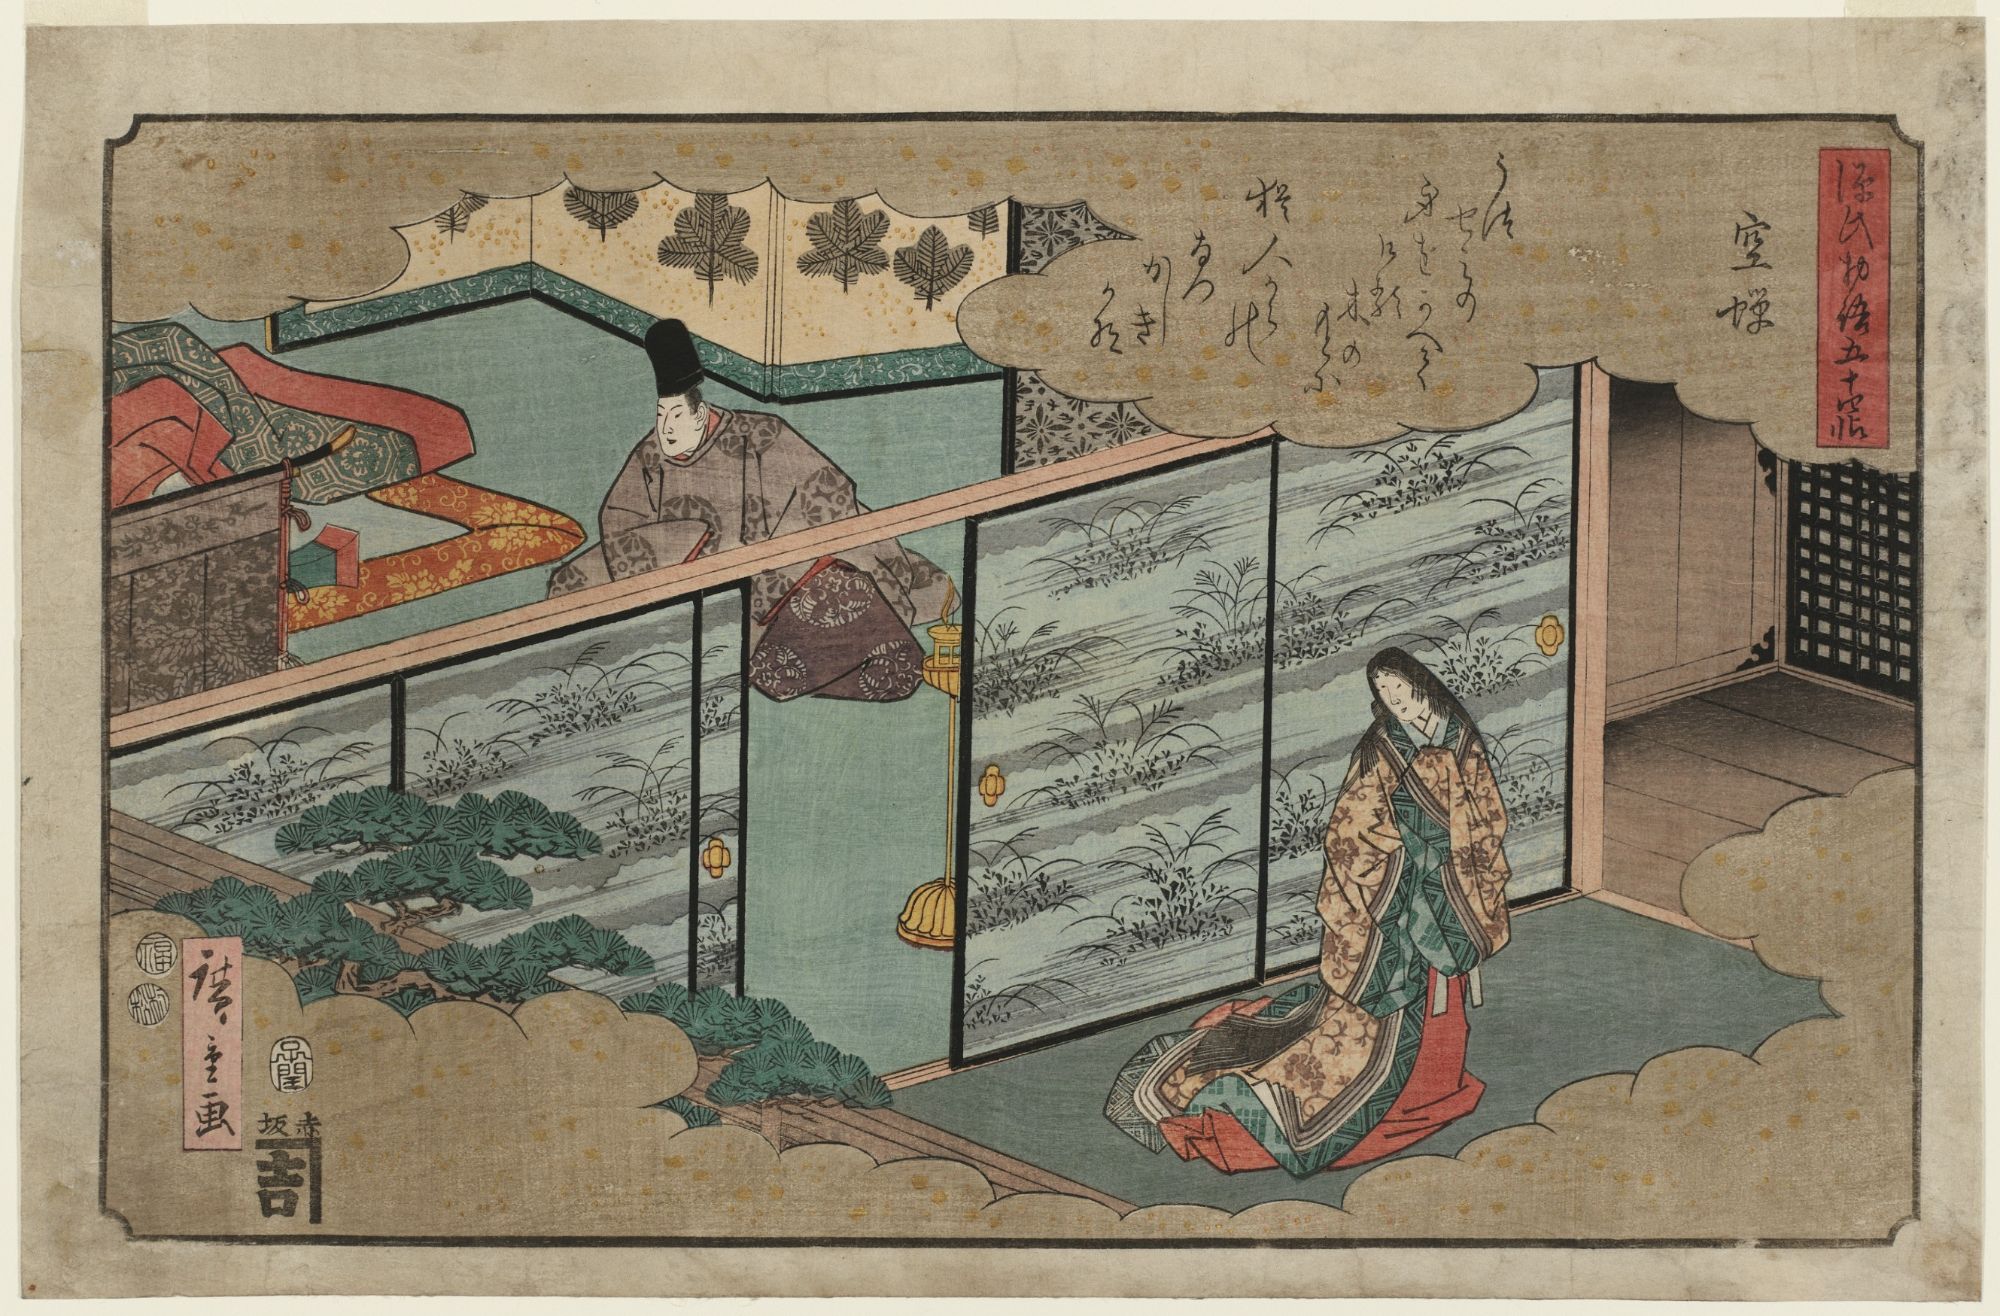 Utagawa Hiroshige Utsusemi From The Series The Fifty Four Chapters Of